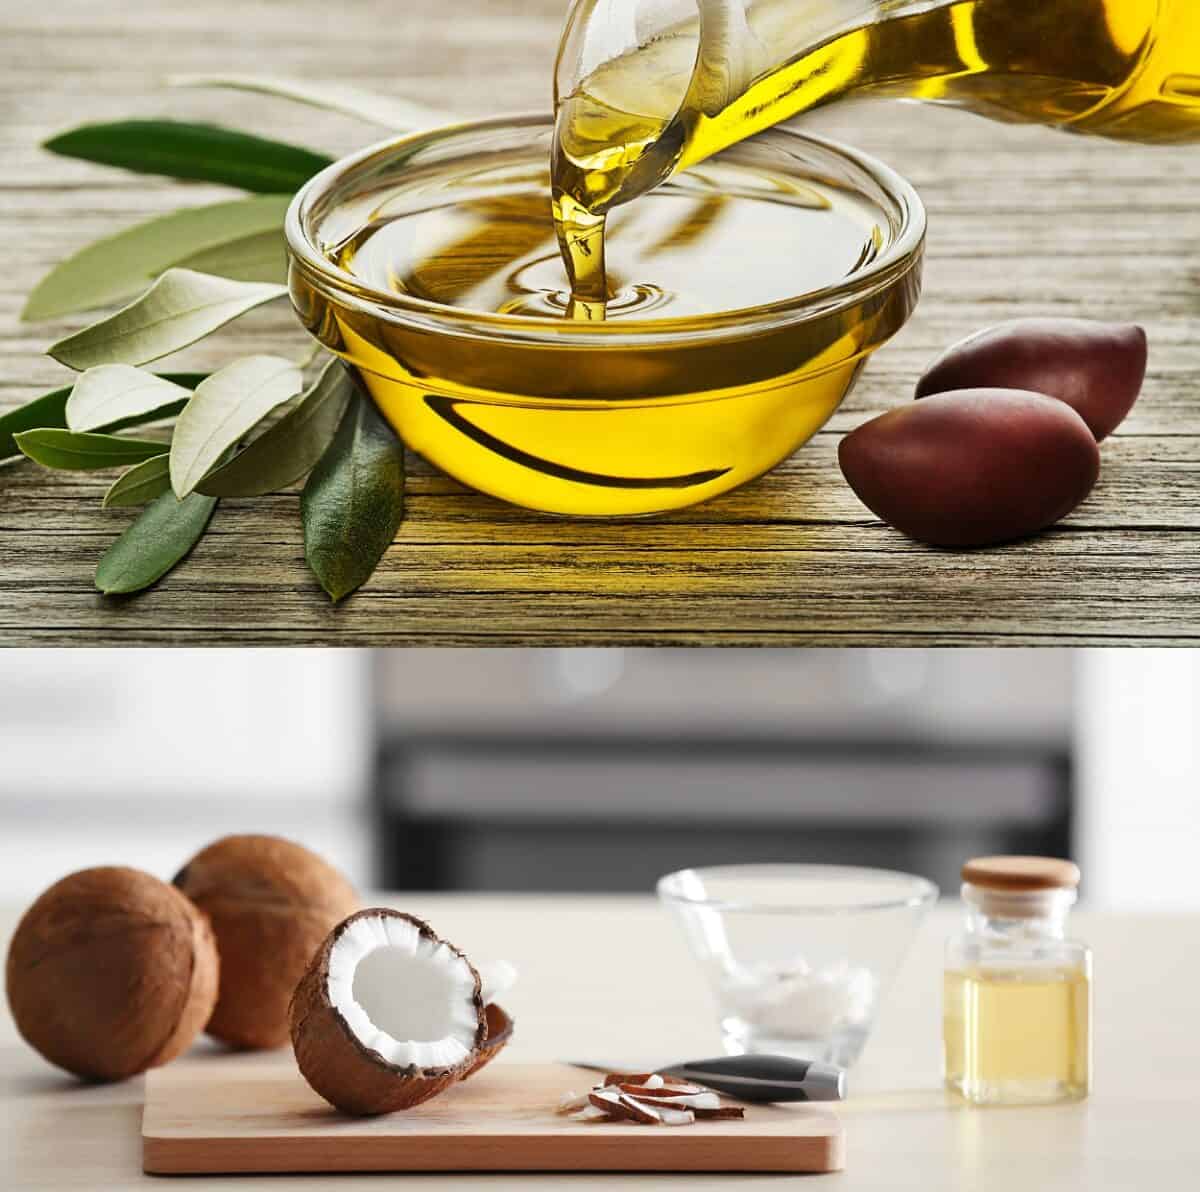 Can You Substitute Coconut Oil for Olive Oil?